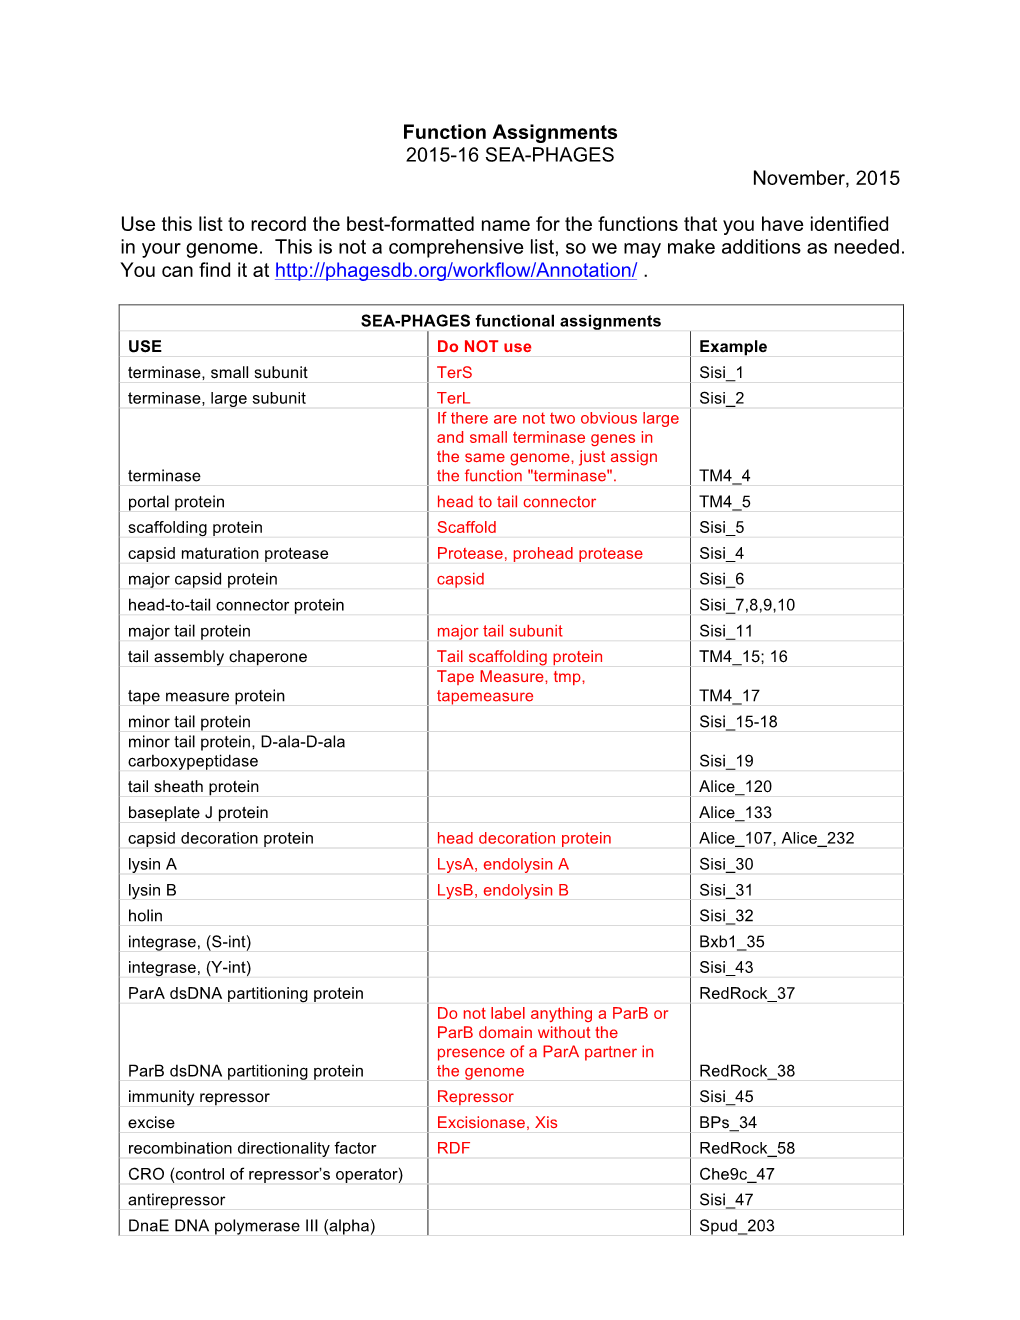 Function Assignments 2015-16 SEA-PHAGES November, 2015